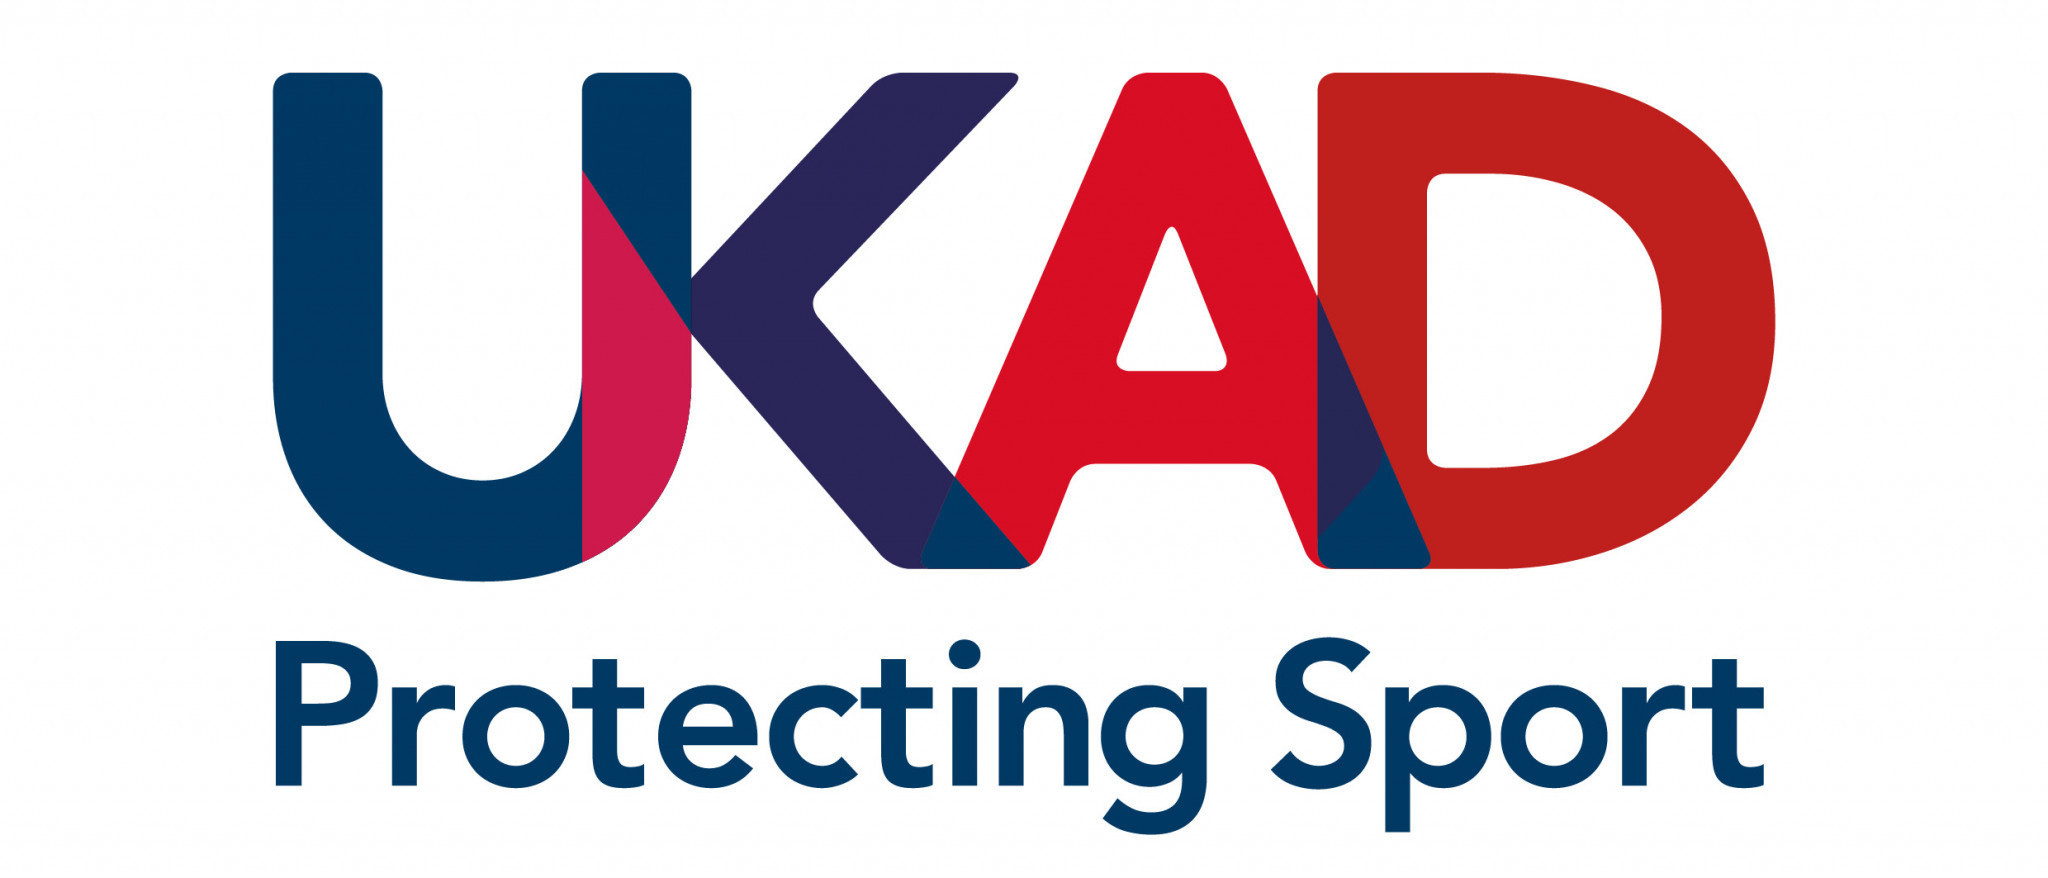 UK Anti-Doping will keep its COVID-19 safety measures in place despite the easing of restrictions in England ©UKAD